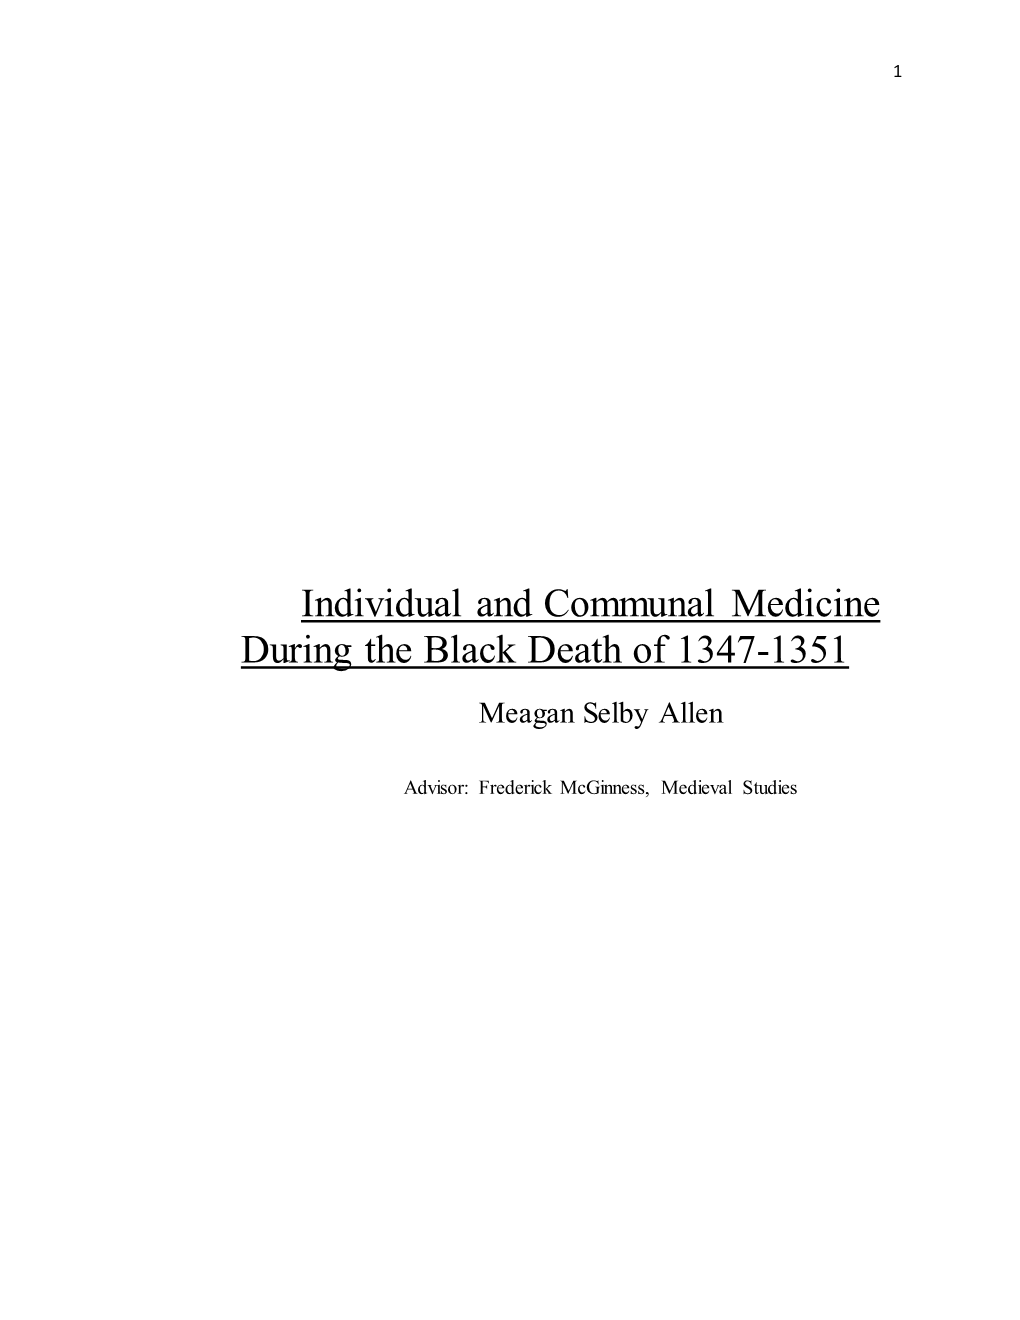 Individual and Communal Medicine During the Black Death of 1347-1351